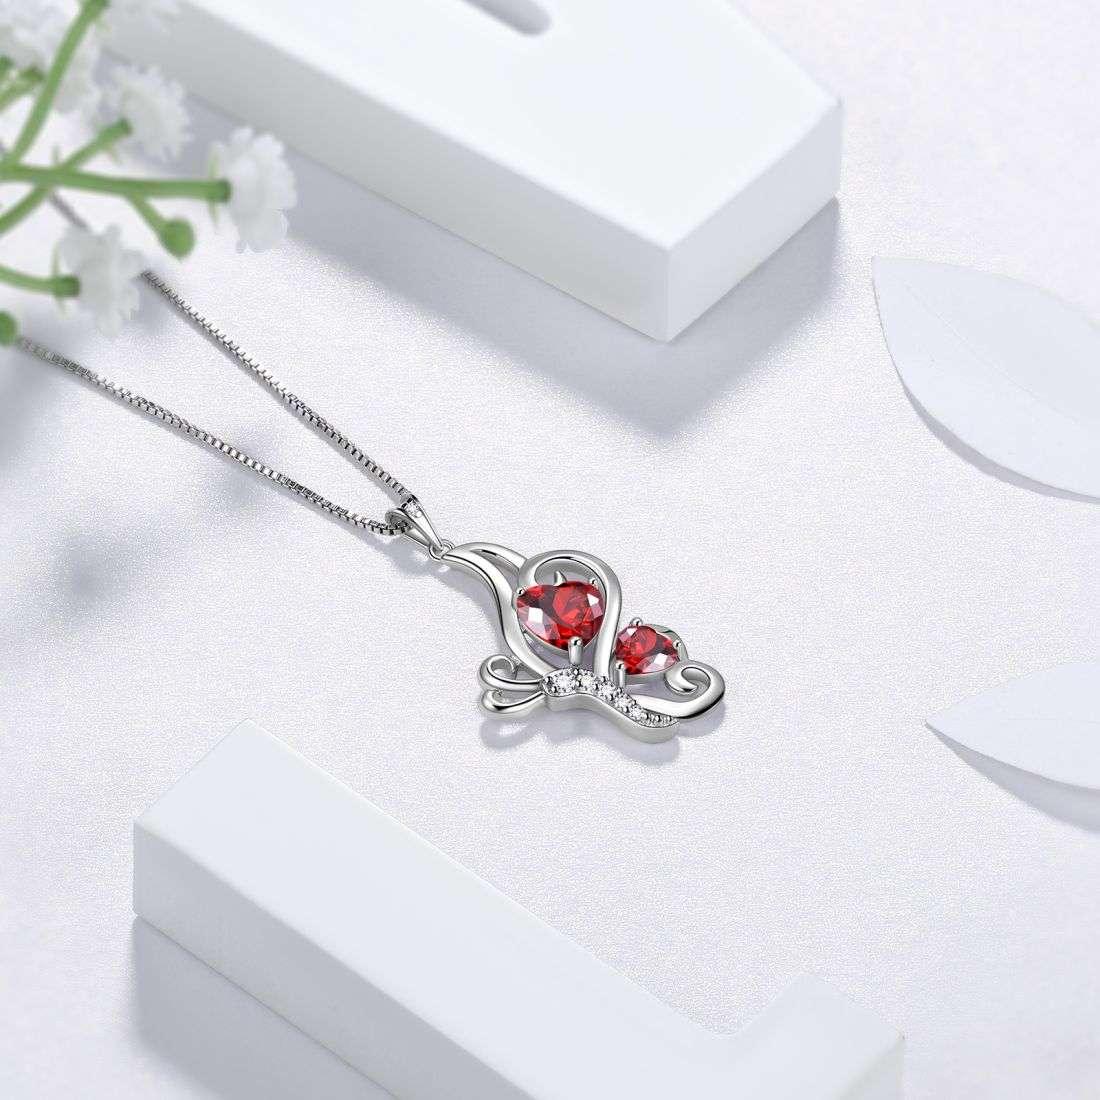 Butterfly Birthstone January Garnet Necklace Sterling Silver - Necklaces - Aurora Tears